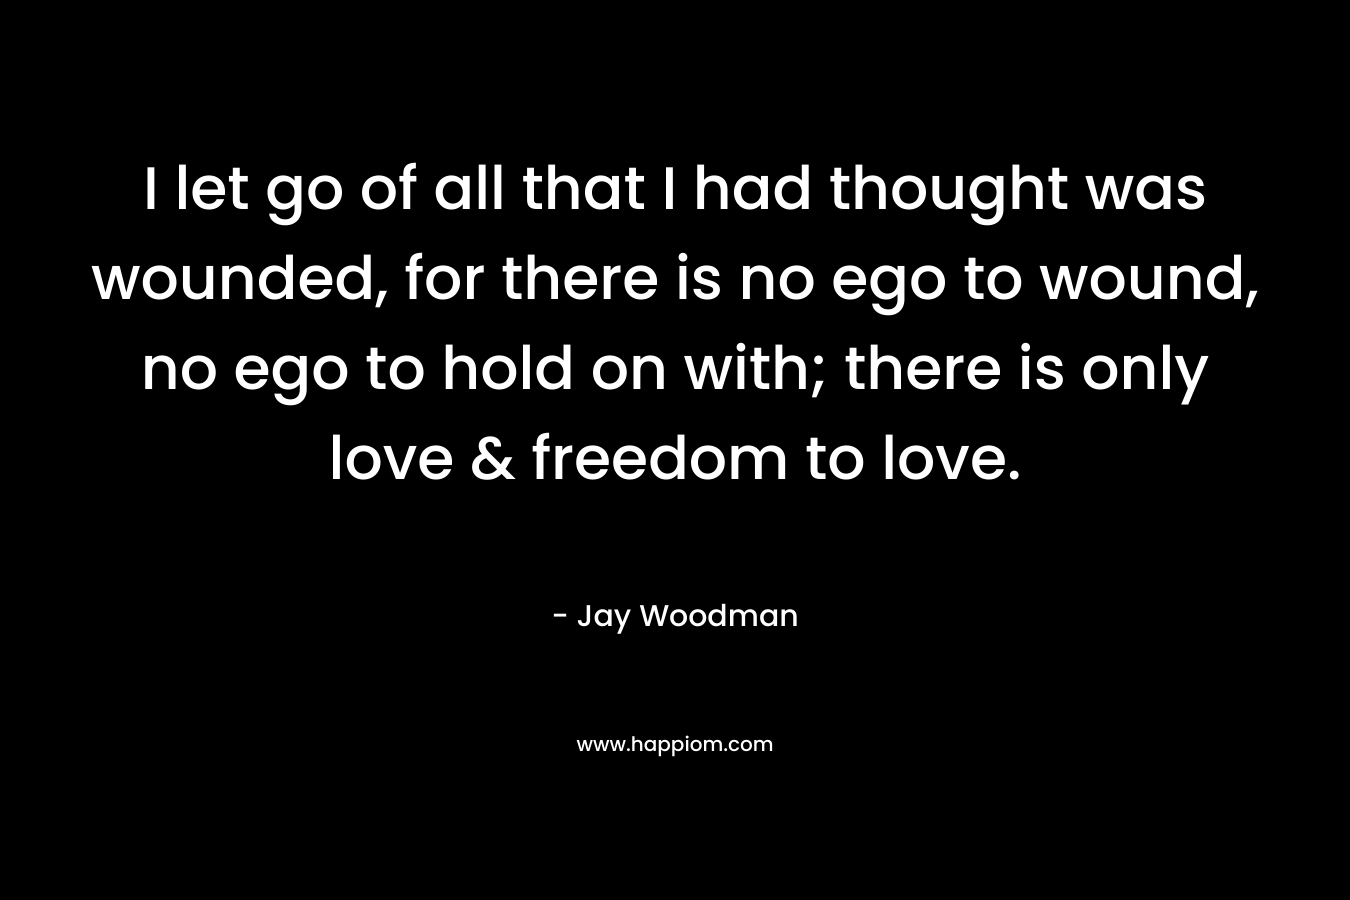 I let go of all that I had thought was wounded, for there is no ego to wound, no ego to hold on with; there is only love & freedom to love. – Jay Woodman